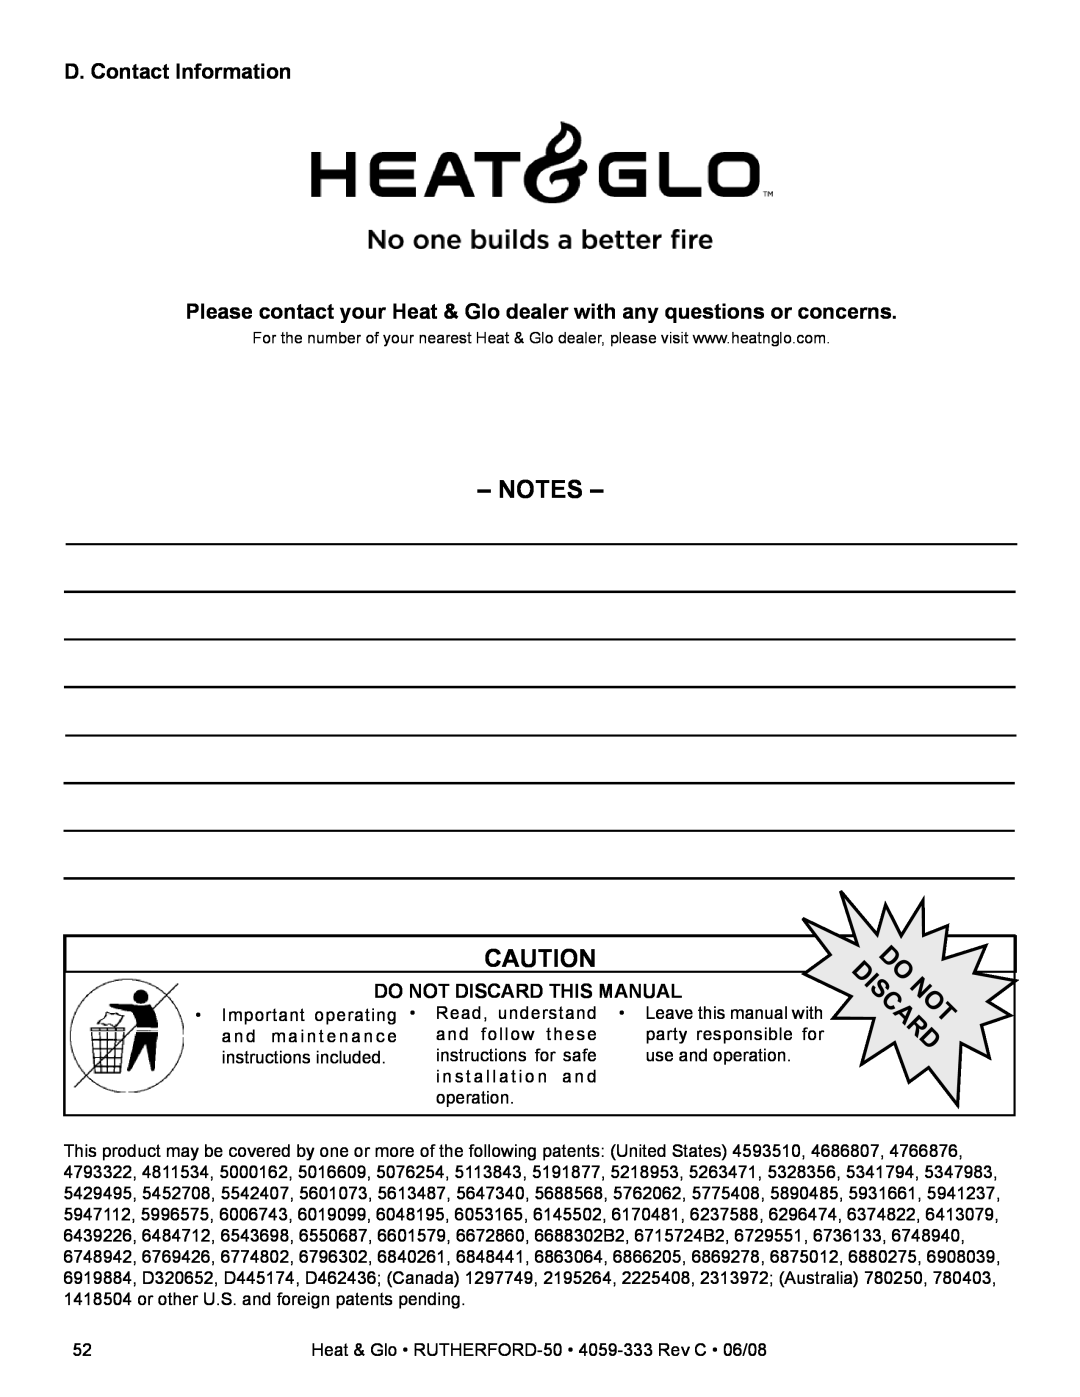 Heat & Glo LifeStyle 50 owner manual D. Contact Information, Do Not Discard This Manual, Do Discardnot 